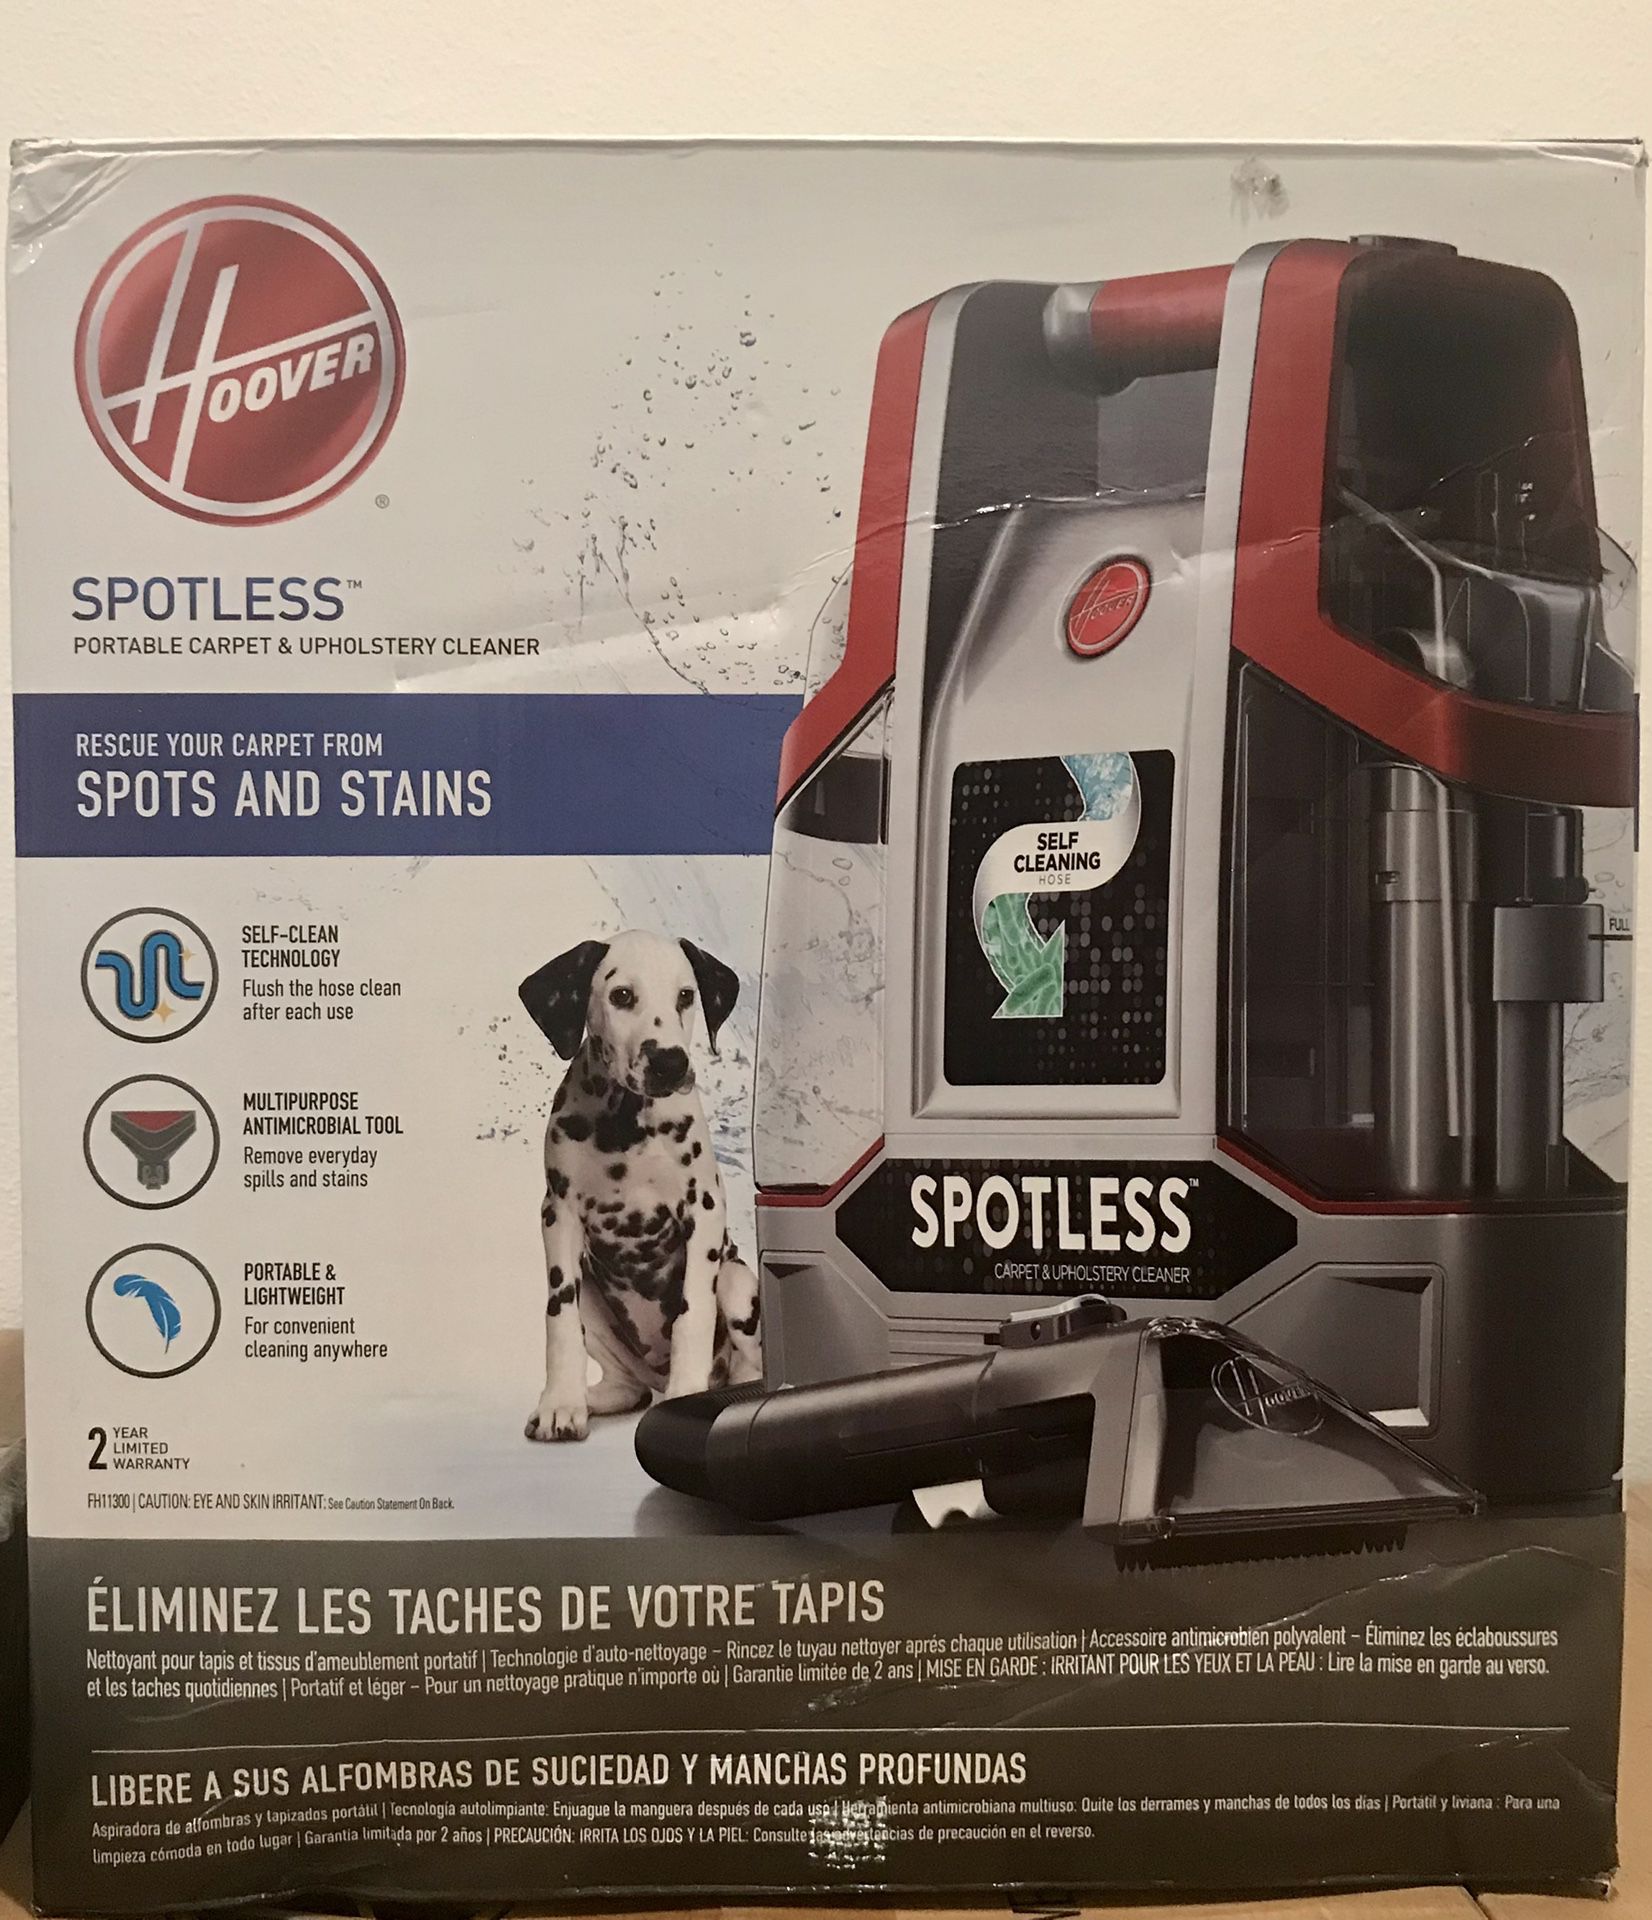 NEW! Hoover Spotless Portable Carpet & Upholstery Spot Cleaner, FH11300, Red